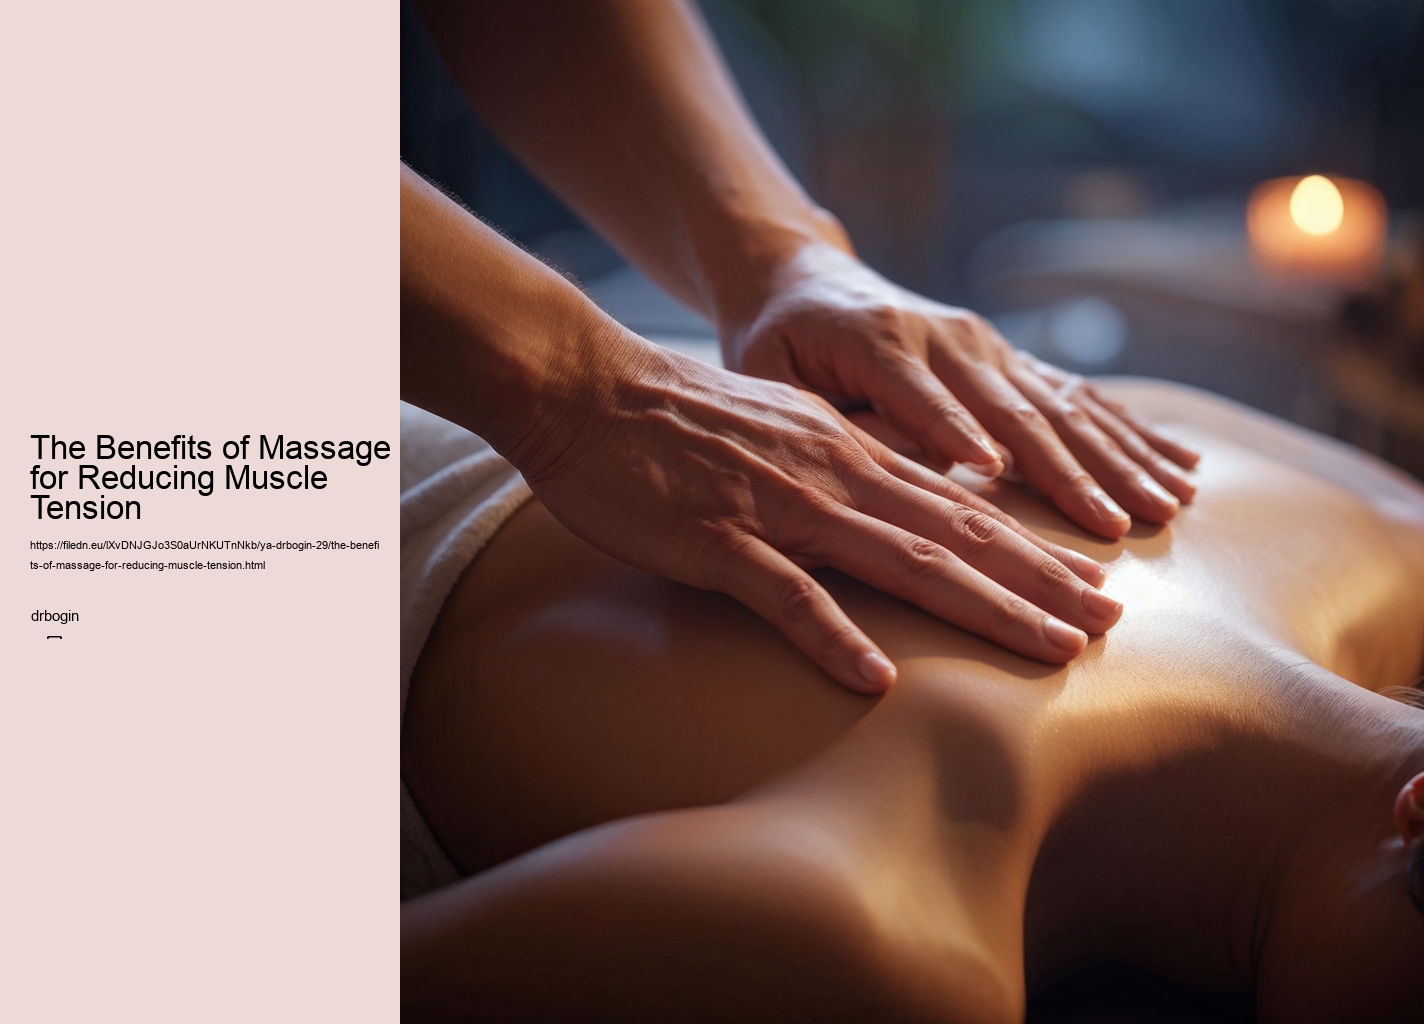 The Benefits of Massage for Reducing Muscle Tension